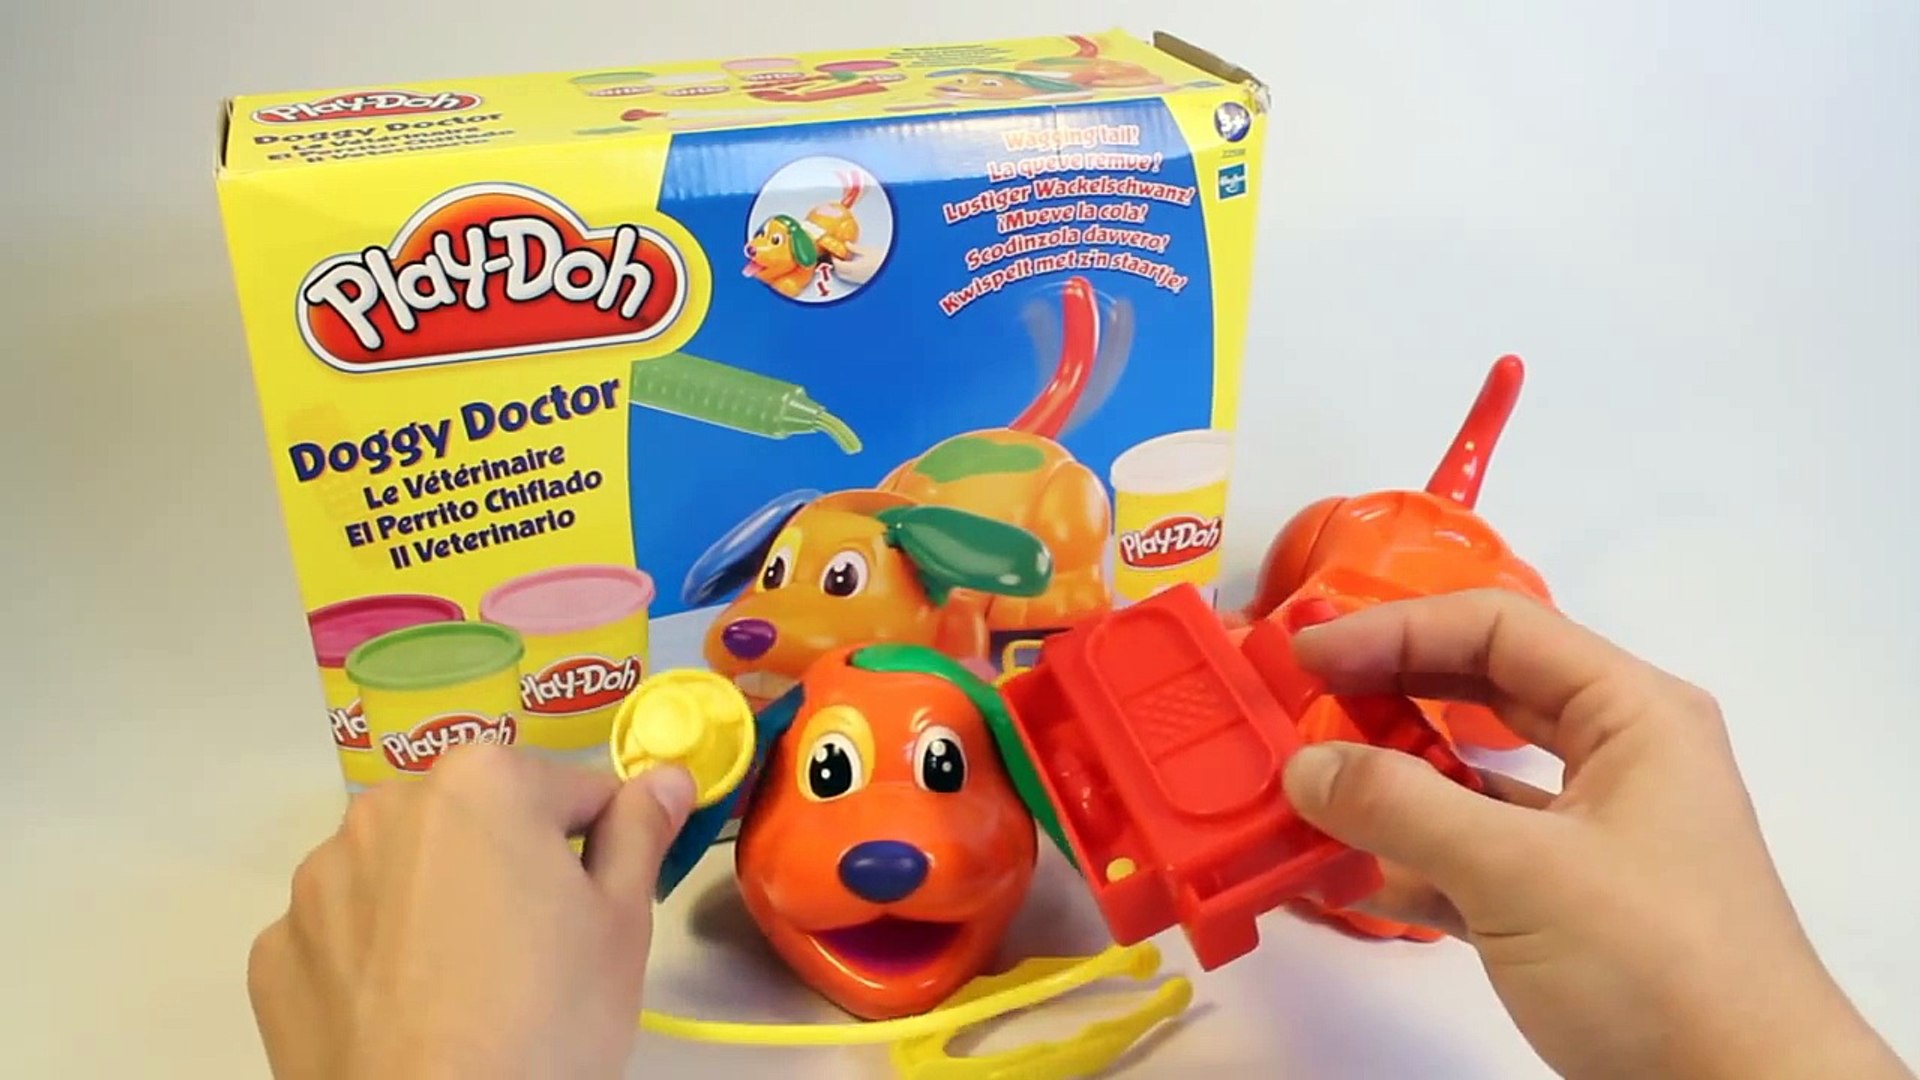 play doh doggy doctor